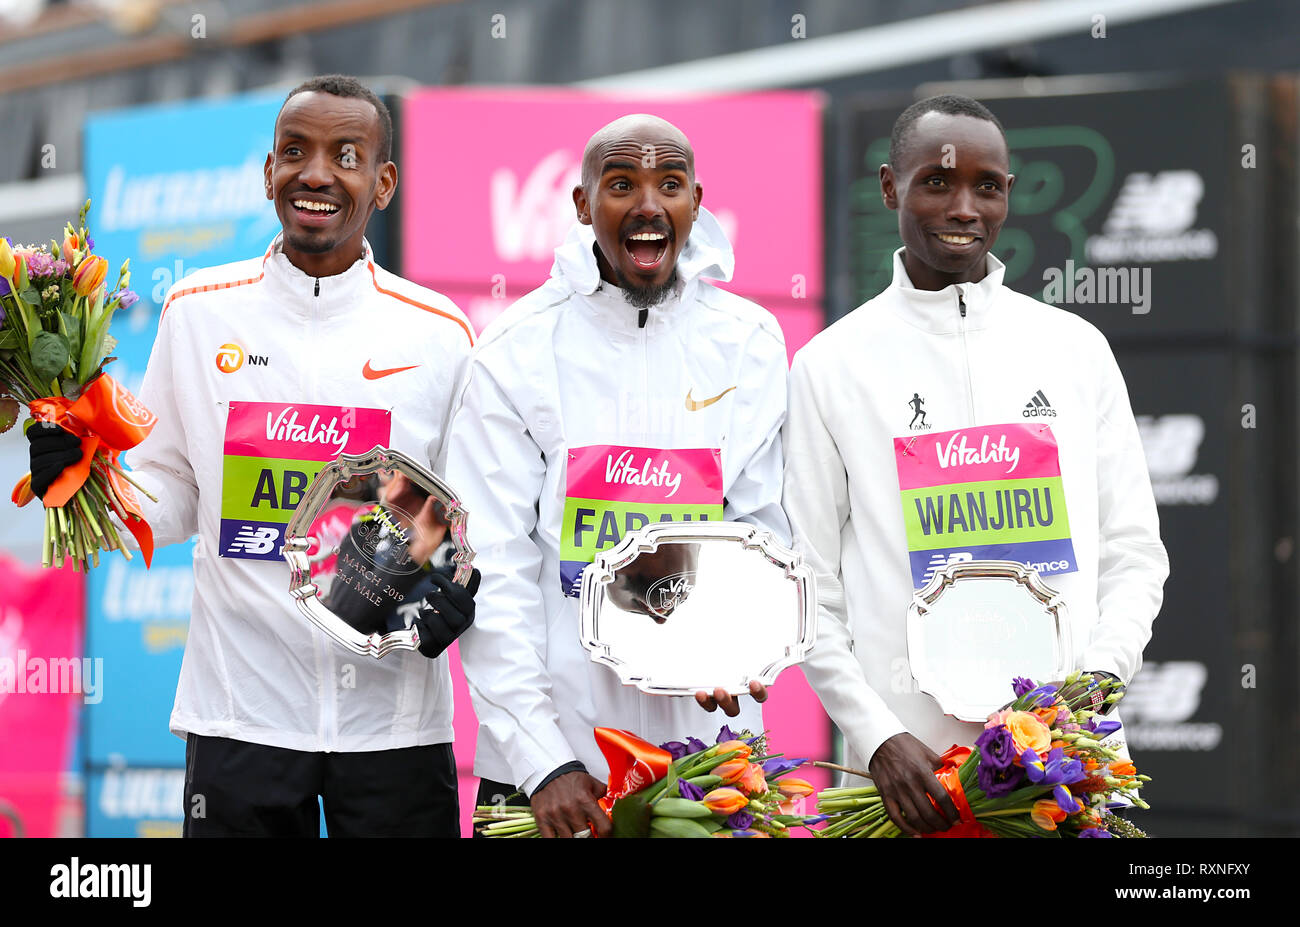 Mo Farah winner of the men's race (centre) with Bashir Abdi who finished secoond (left) and Daniel Wanjiru who finished third during the Vitality Big Half in London. Stock Photo